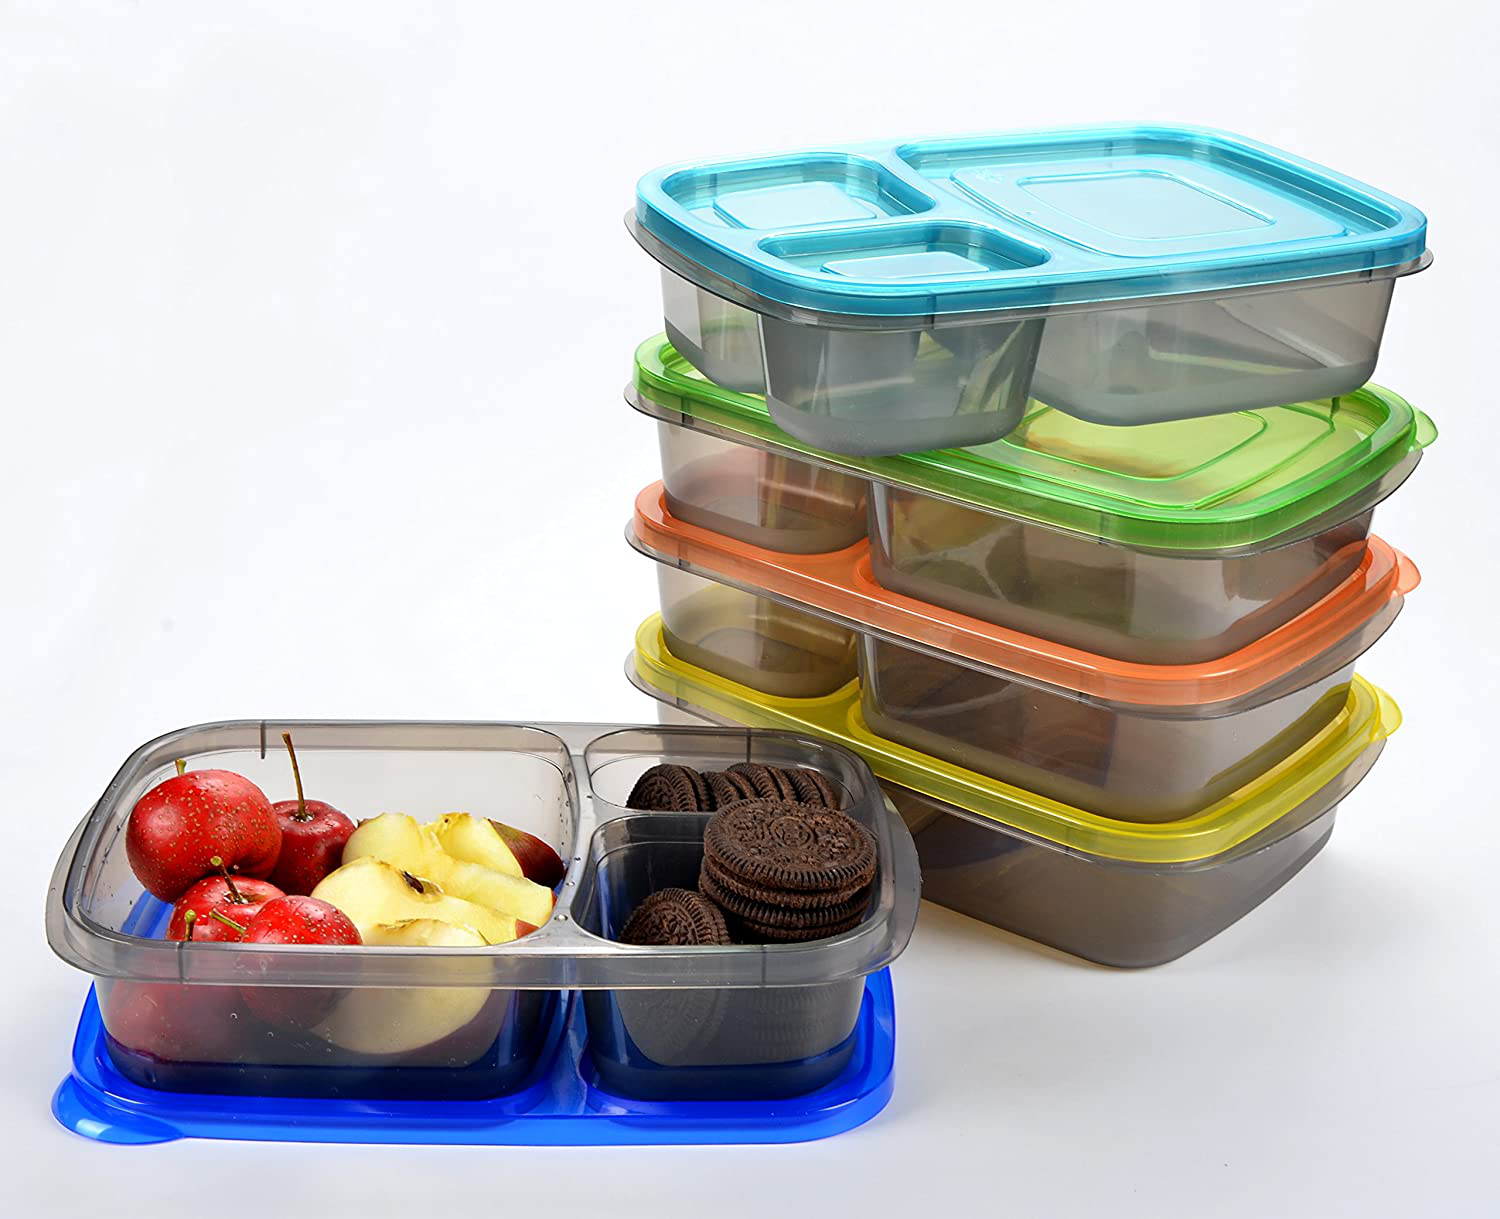 Youngever 8 Pack Meal Prep Containers, Reusable Plastic Divided Food  Storage Container Boxes (3-Compartment)